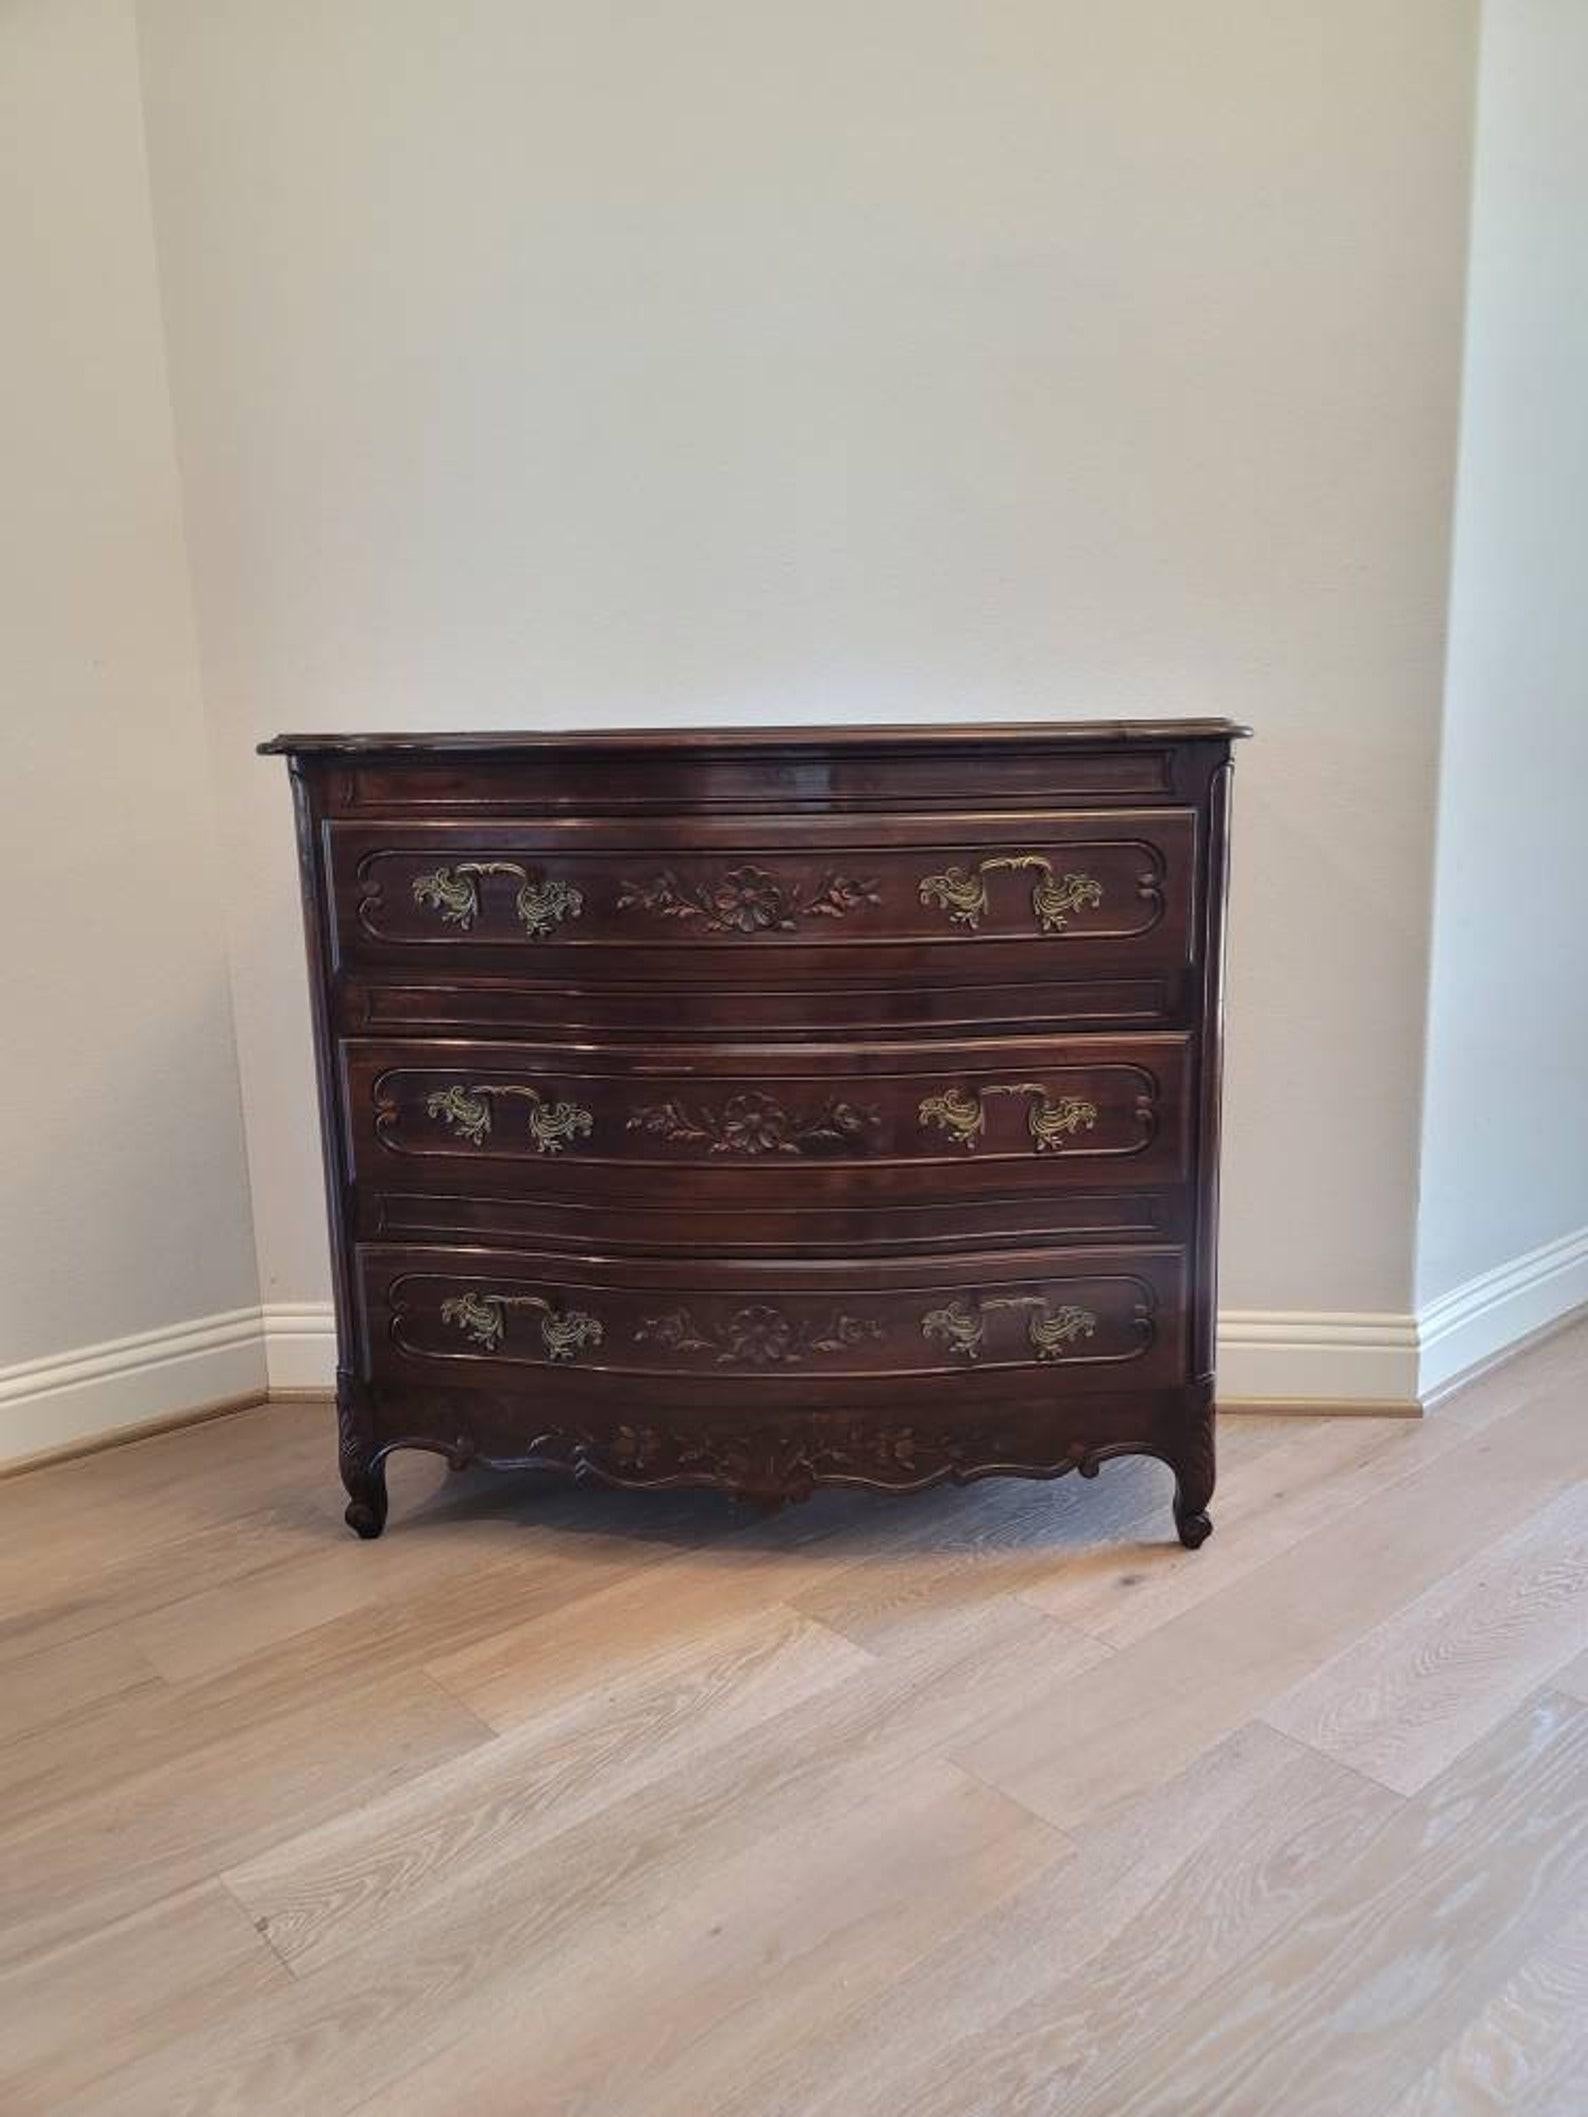 A fine French Provincial Louis XV style chest of drawers commode, early 20th century, having a serpentine shaped wooden top with molded edge, over conforming high quality solid wood case fitted with three drawers, each with dovetail joinery, ornate